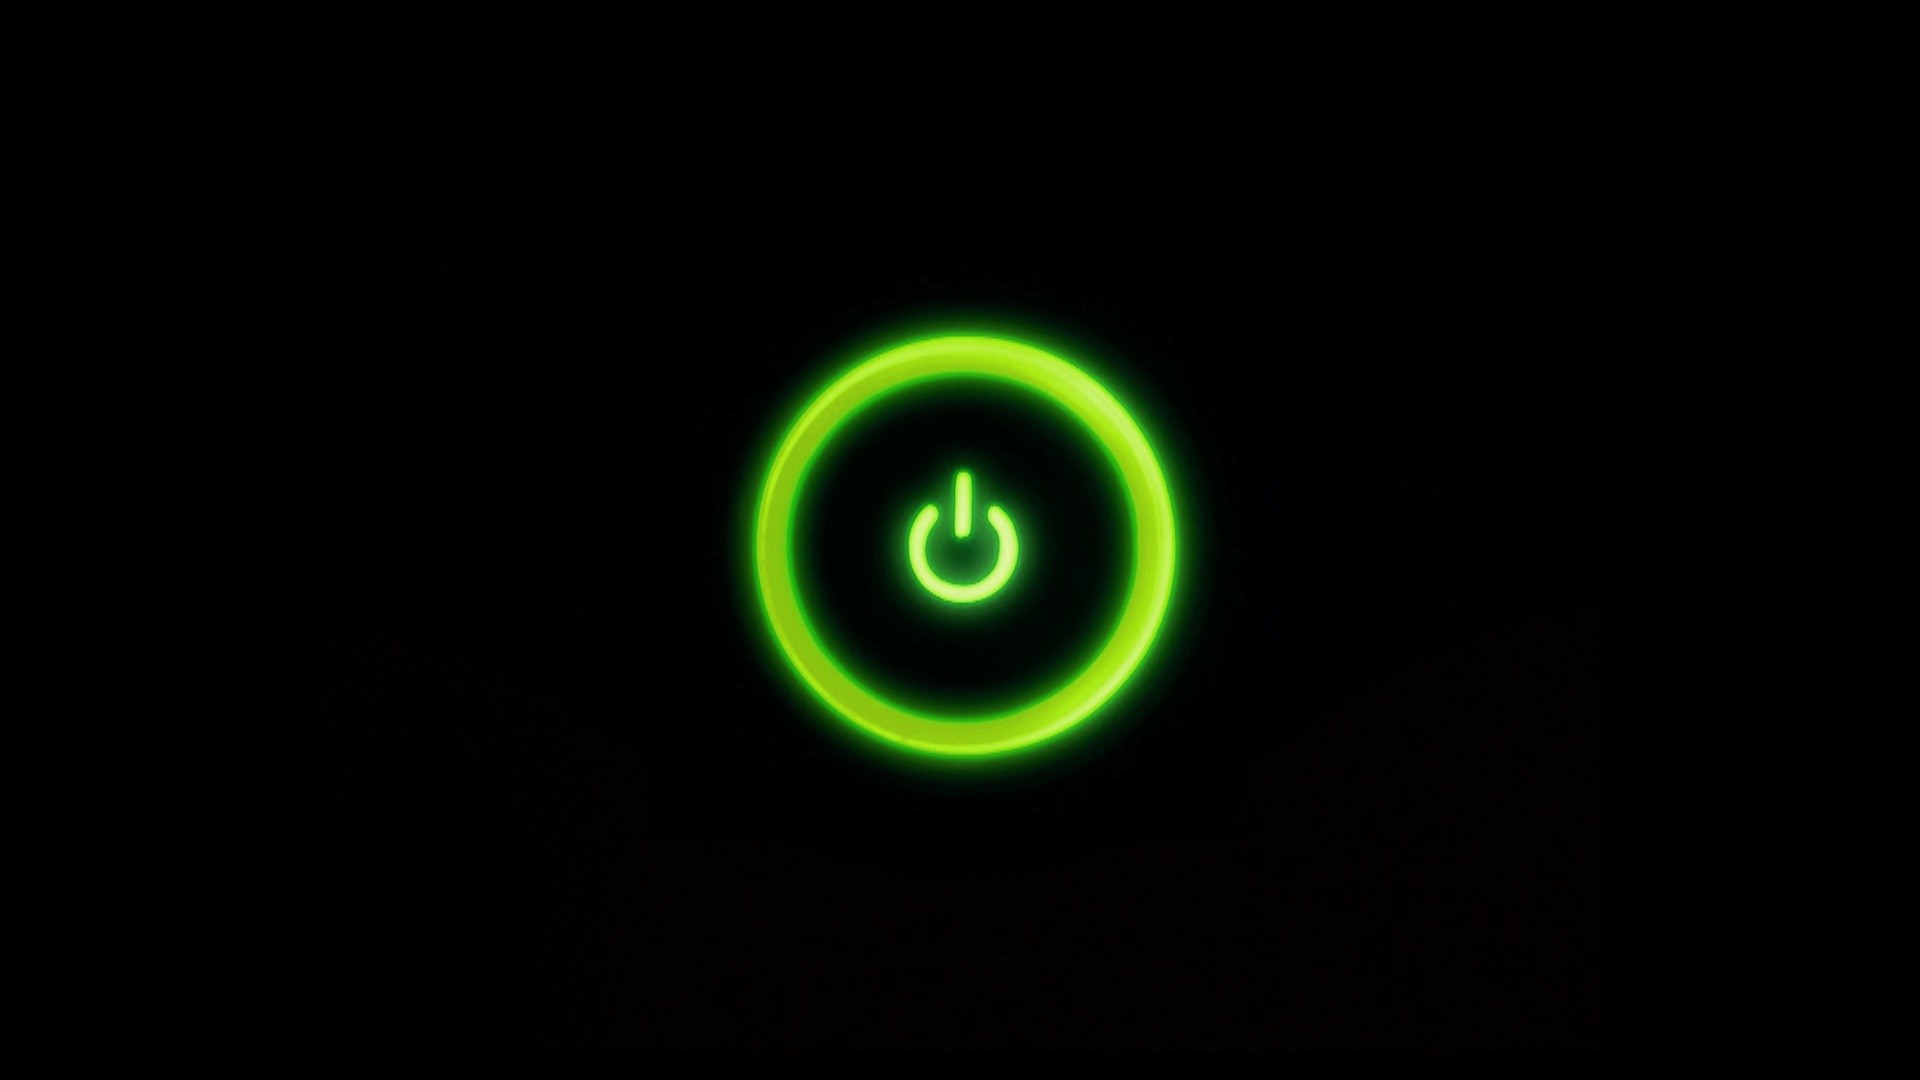 General 1920x1080 power buttons simple background minimalism black green neon computer black background buttons